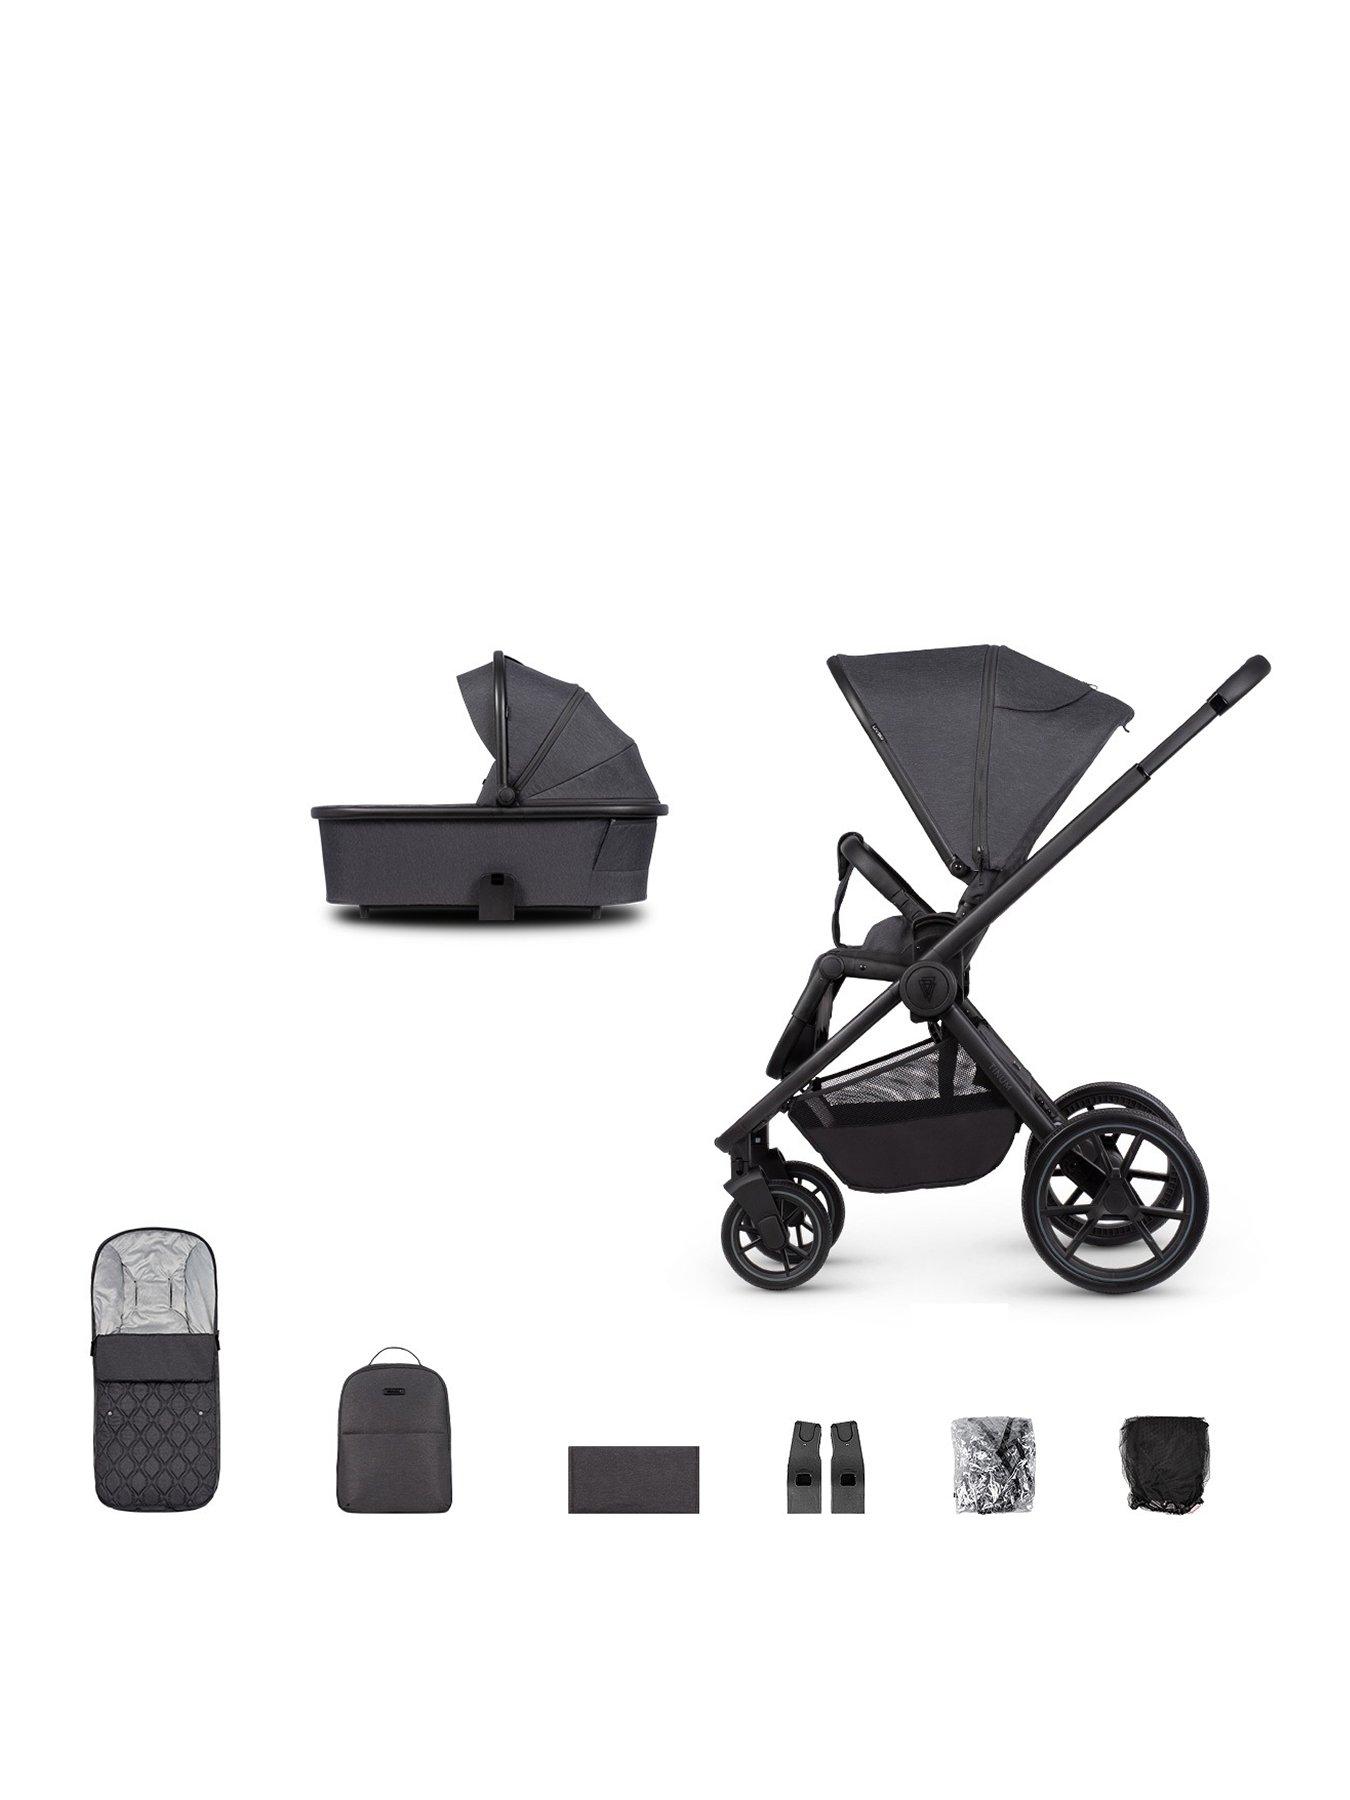 Hauck Shopper Neo 2 Pushchair, Caviar Stone - Lightweight Travel Stroller  (only 7.9kg), Compact & One Hand Folding, with Raincover : :  Baby Products